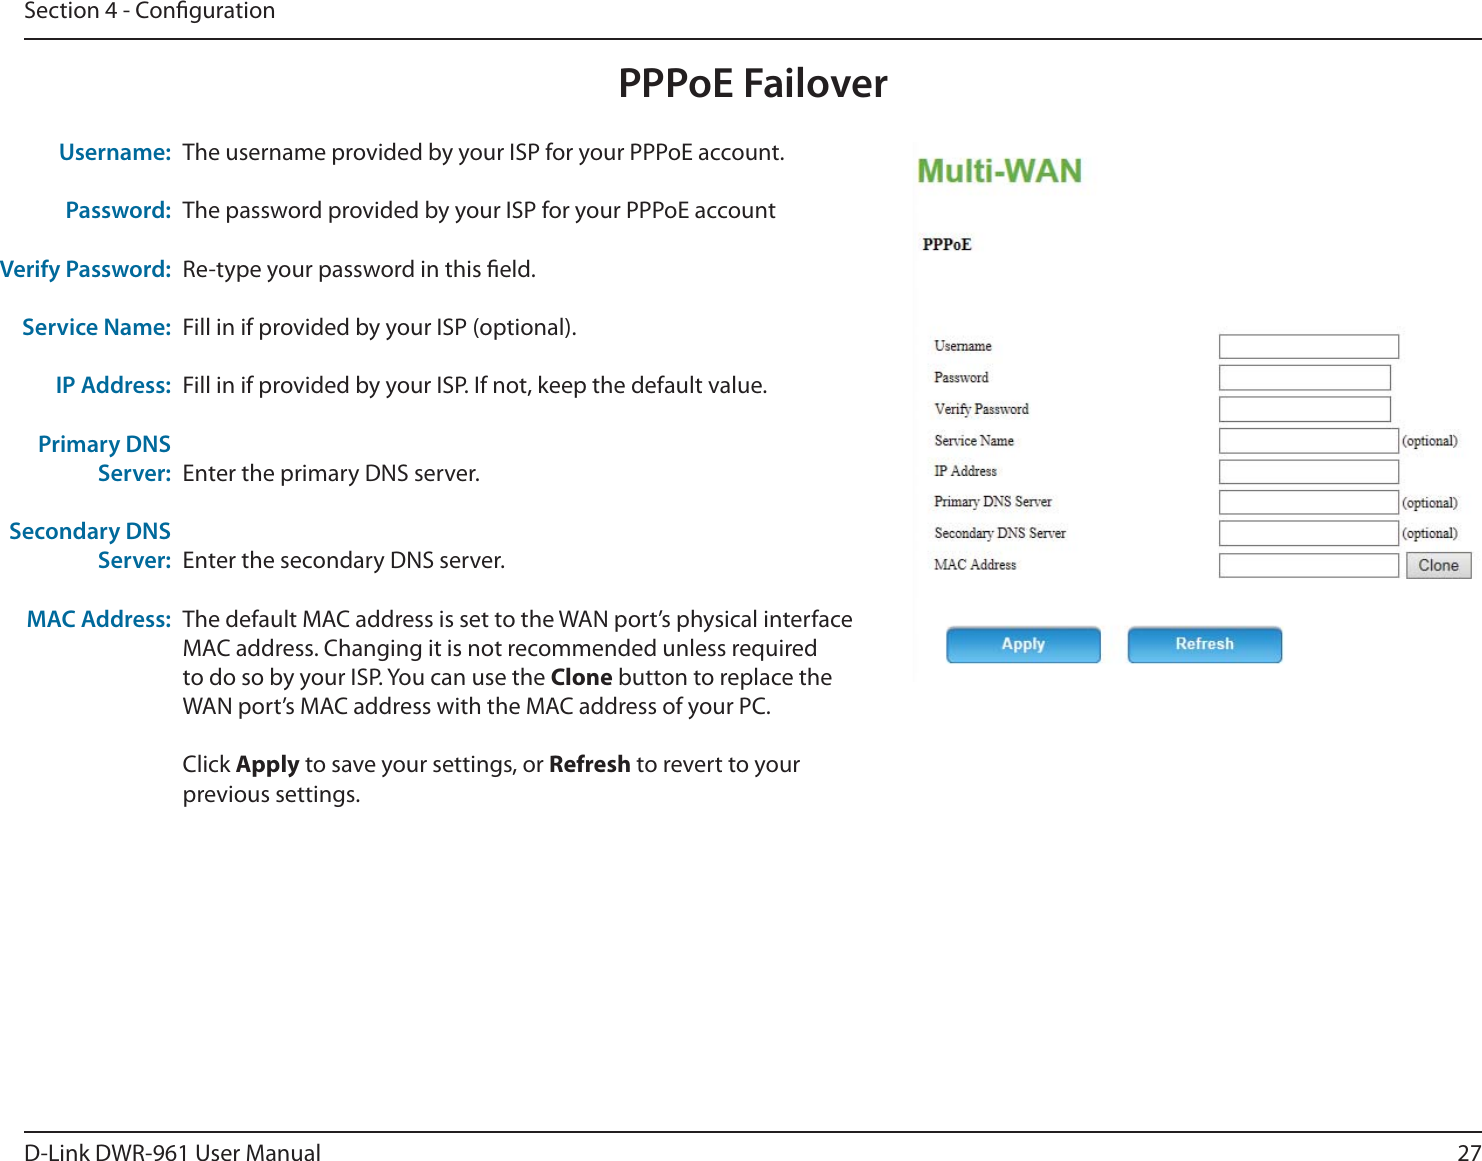 27D-Link DWR-9 User ManualSection 4 - CongurationPPPoE FailoverThe username provided by your ISP for your PPPoE account.The password provided by your ISP for your PPPoE accountRe-type your password in this eld.Fill in if provided by your ISP (optional).Fill in if provided by your ISP. If not, keep the default value.Enter the primary DNS server.Enter the secondary DNS server.The default MAC address is set to the WAN port’s physical interface MAC address. Changing it is not recommended unless required to do so by your ISP. You can use the Clone button to replace the WAN port’s MAC address with the MAC address of your PC.Click Apply to save your settings, or Refresh to revert to your previous settings.Username:Password:Verify Password:Service Name:IP Address:Primary DNS Server:Secondary DNS Server:MAC Address: